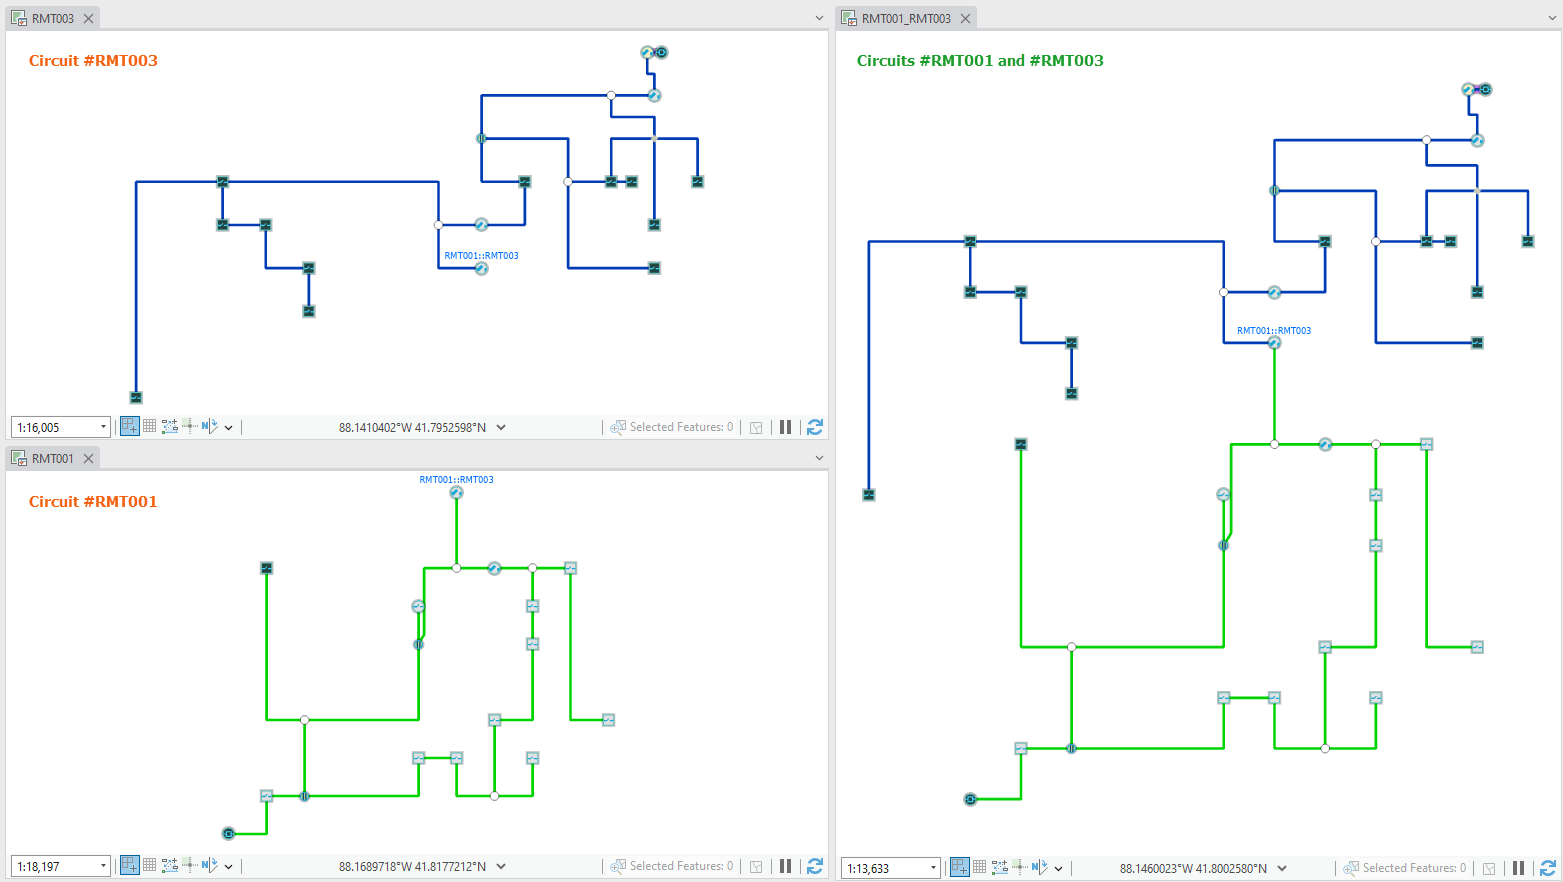 State of electric circuit diagram samples before a load balance operation